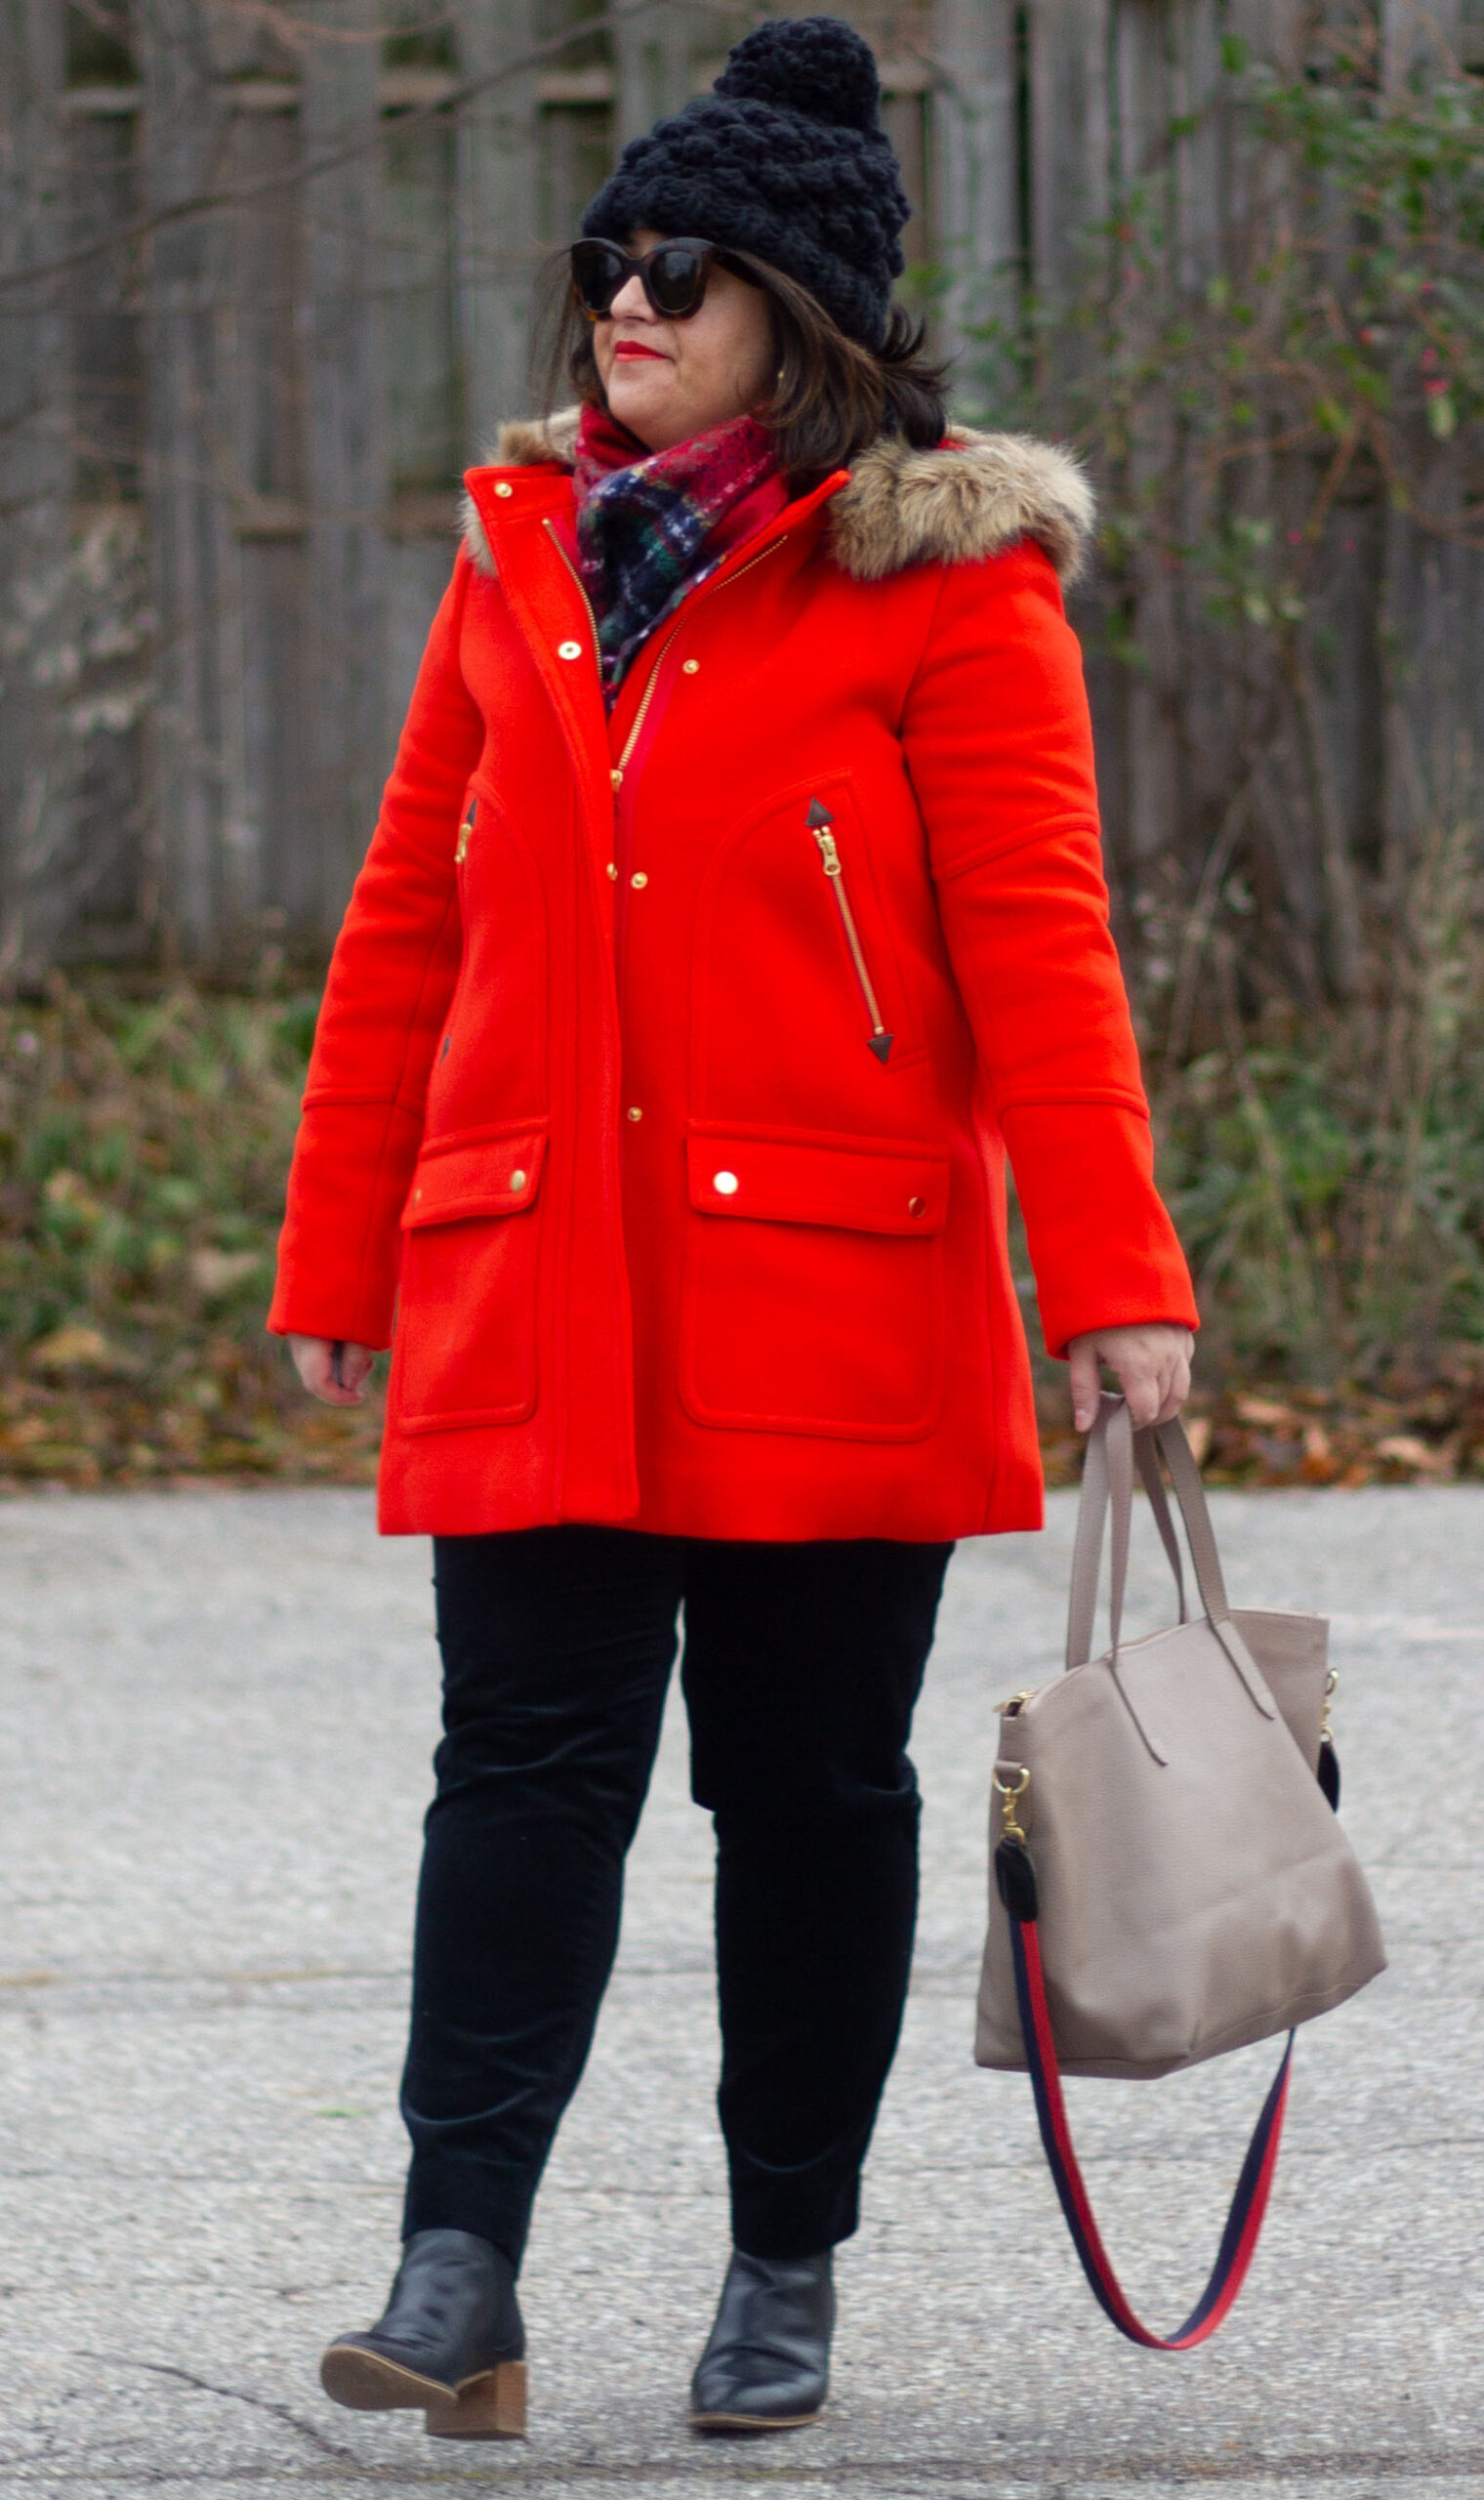 jcrew chateau parka in red